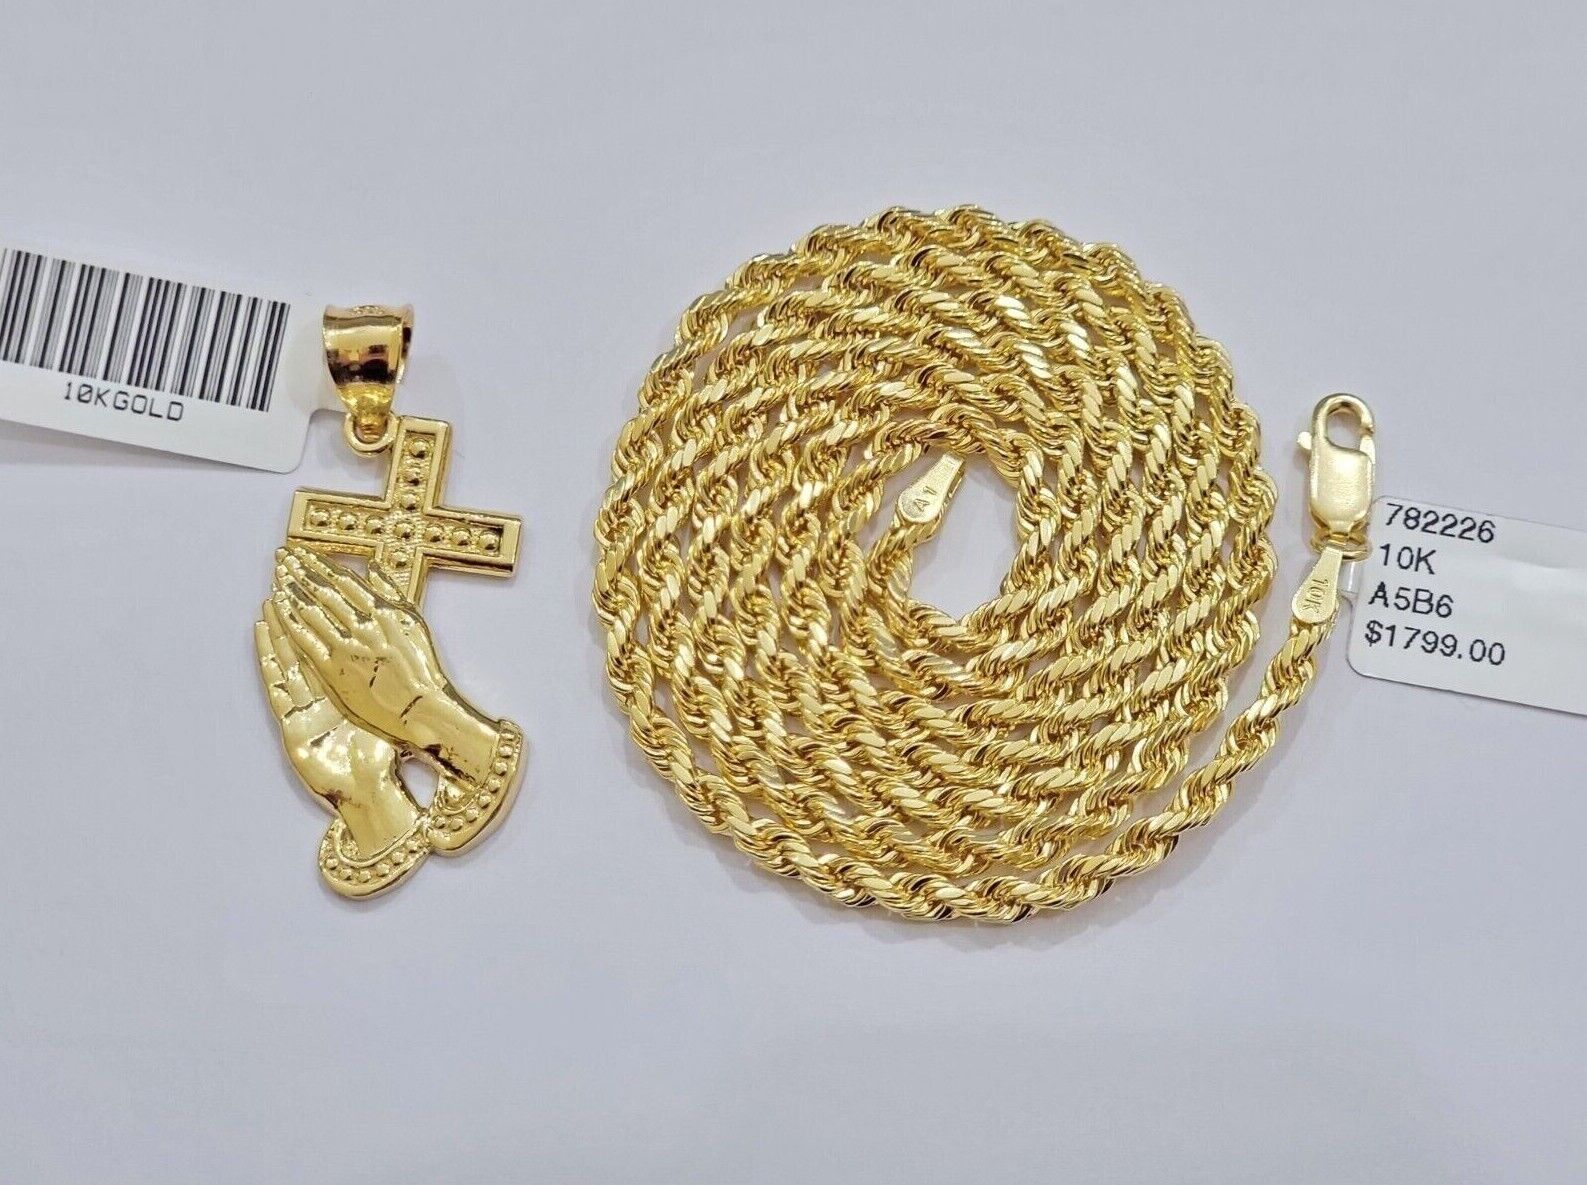 10k Gold Rope Chain Praying Hand Charm Pendant Set 18-28''Inch 3mm Necklace REAL